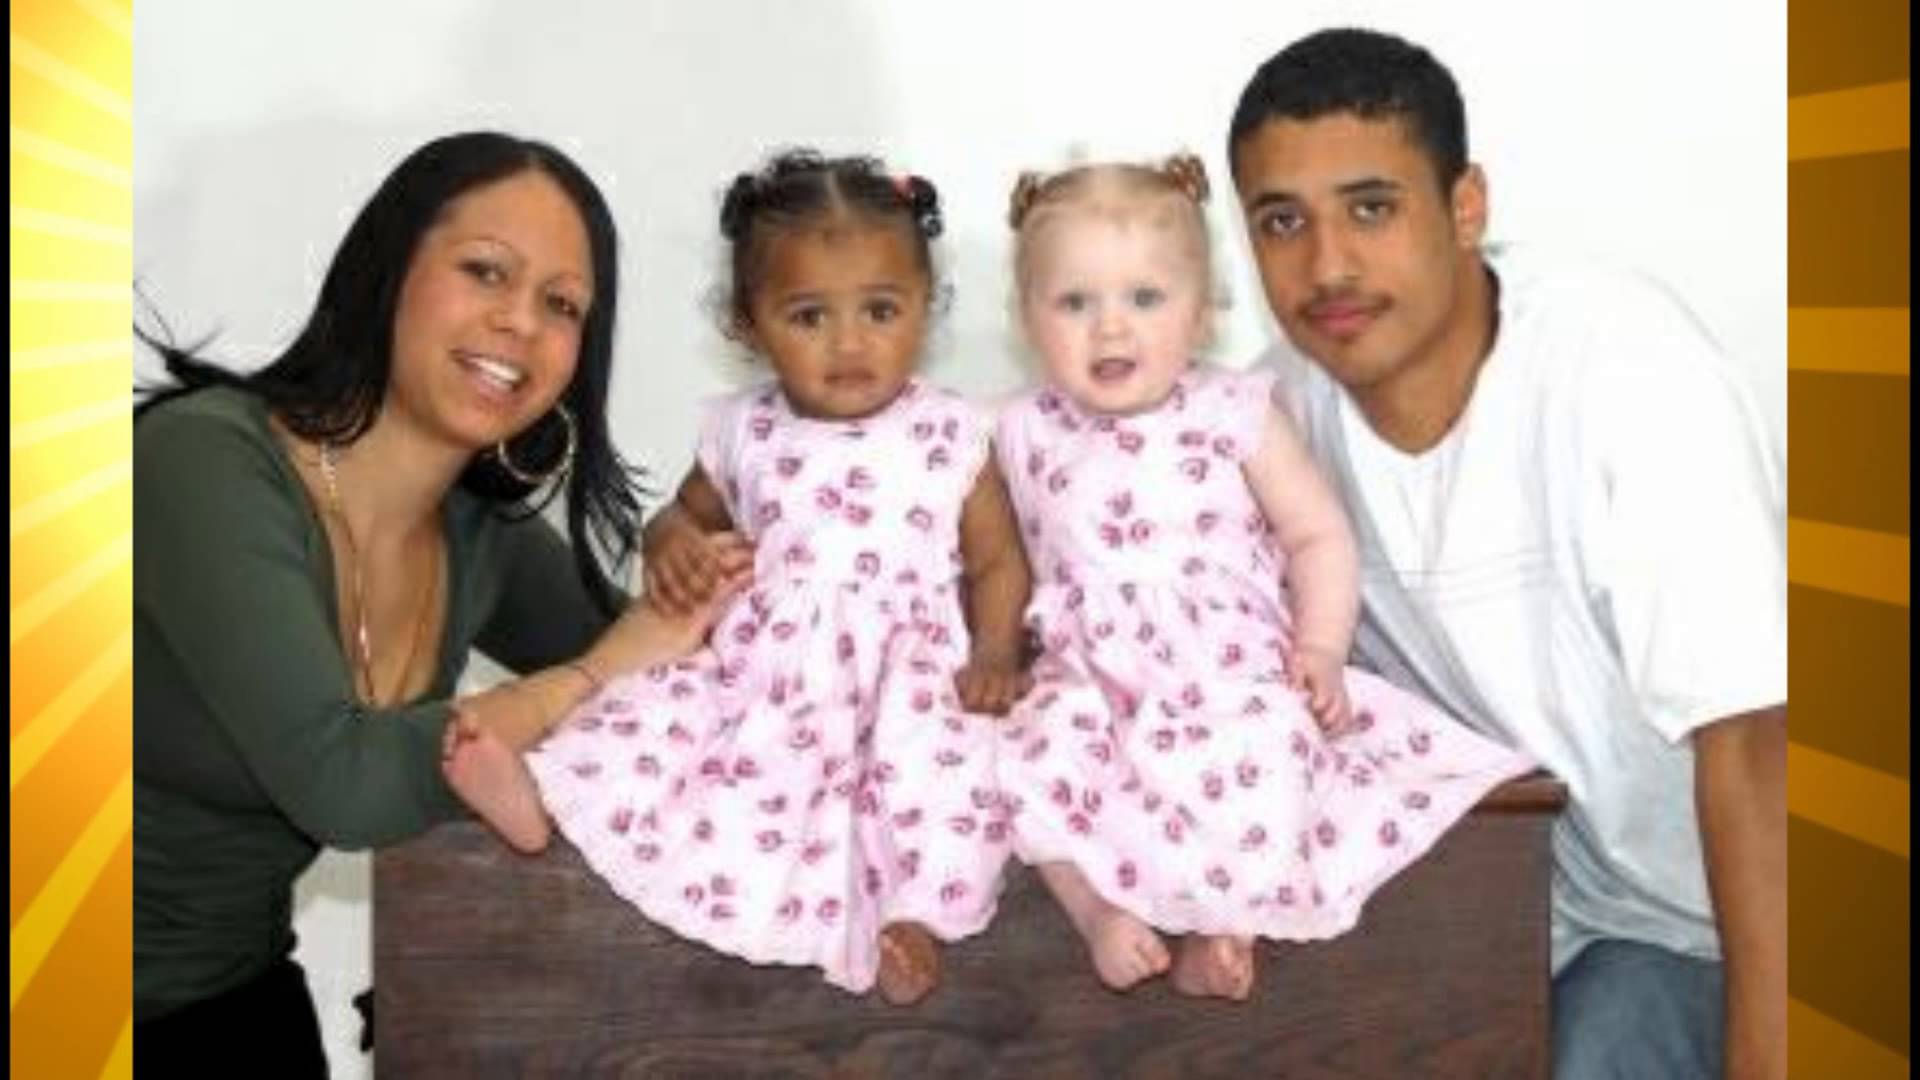 Racist People Interracial Families Pictureicon